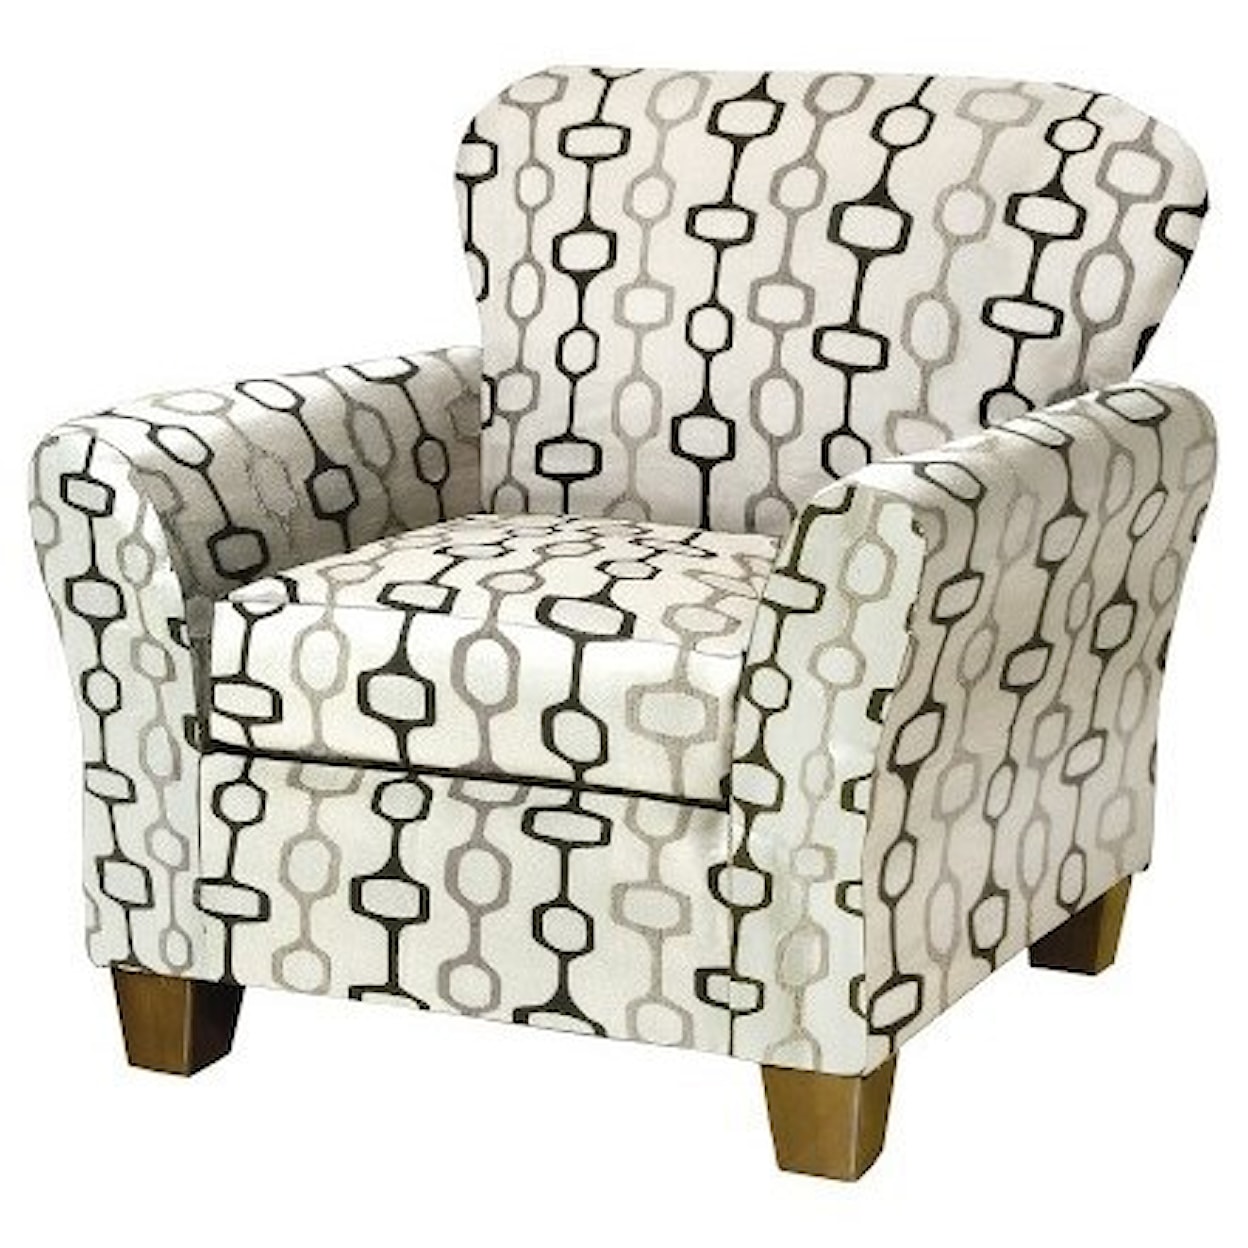 Serta Upholstery by Hughes Furniture 3010 Upholstered Chair